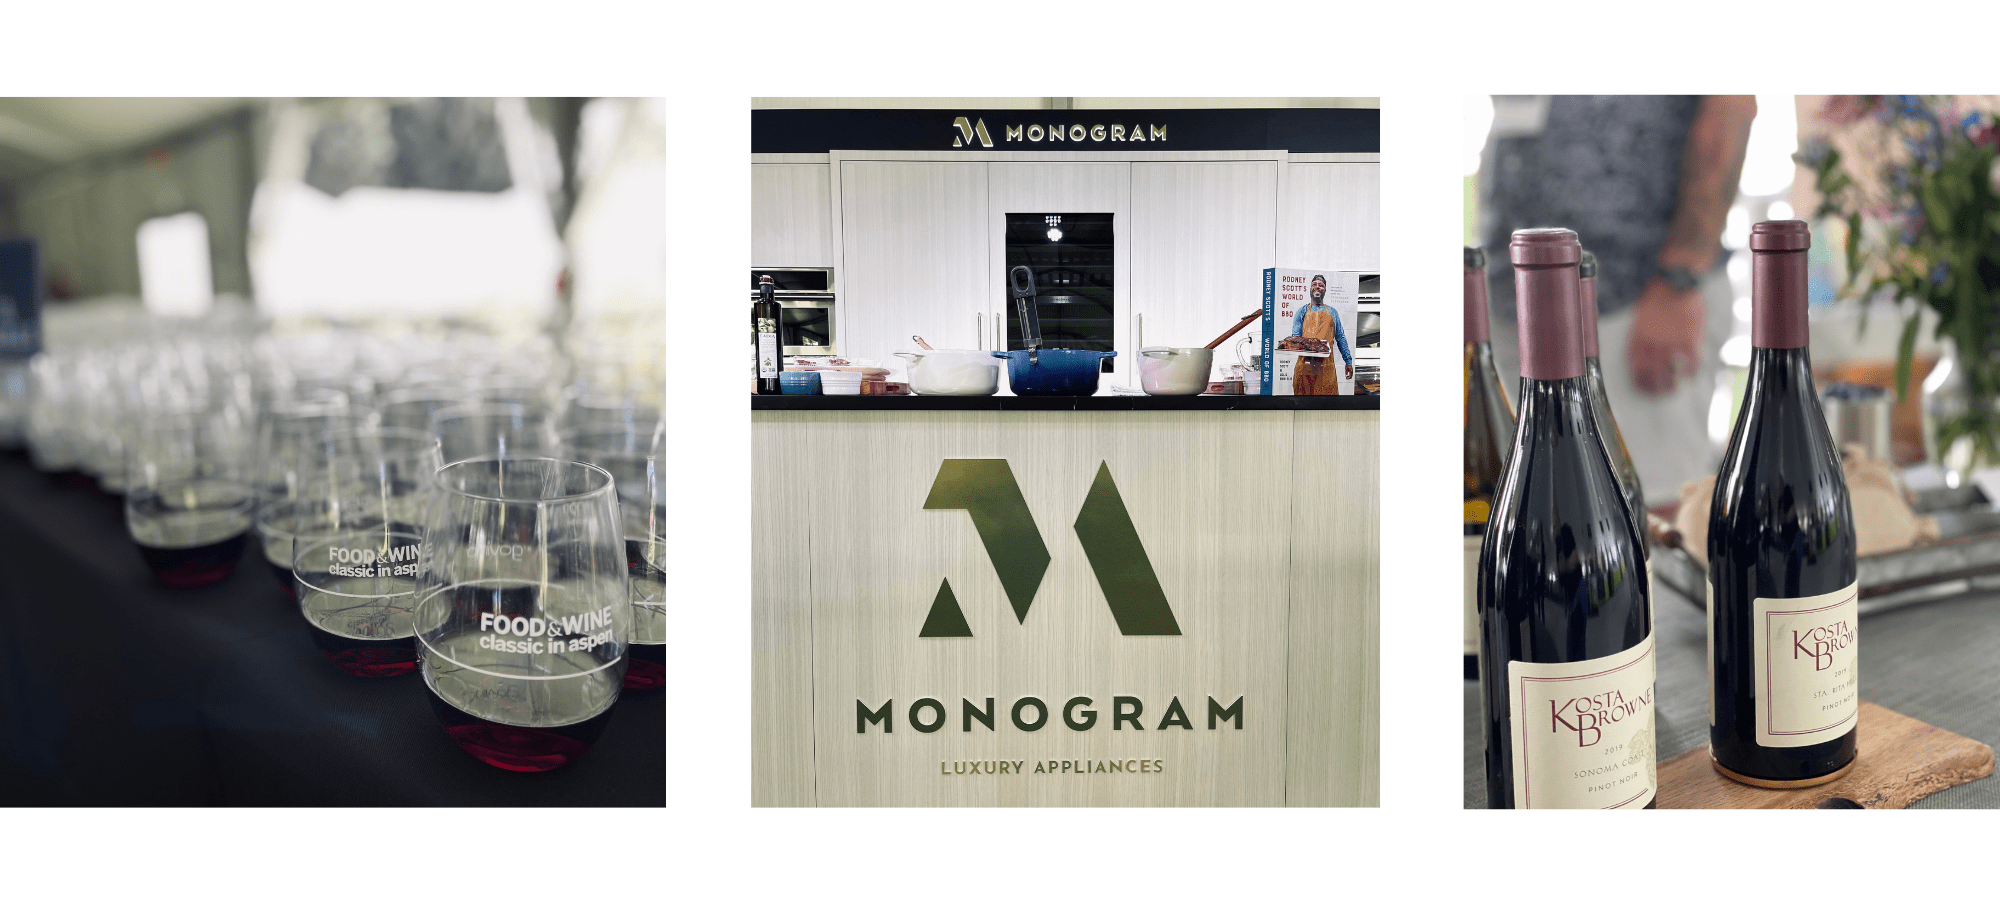 Laura Umansky joined Monogram at Aspen Food and Wine